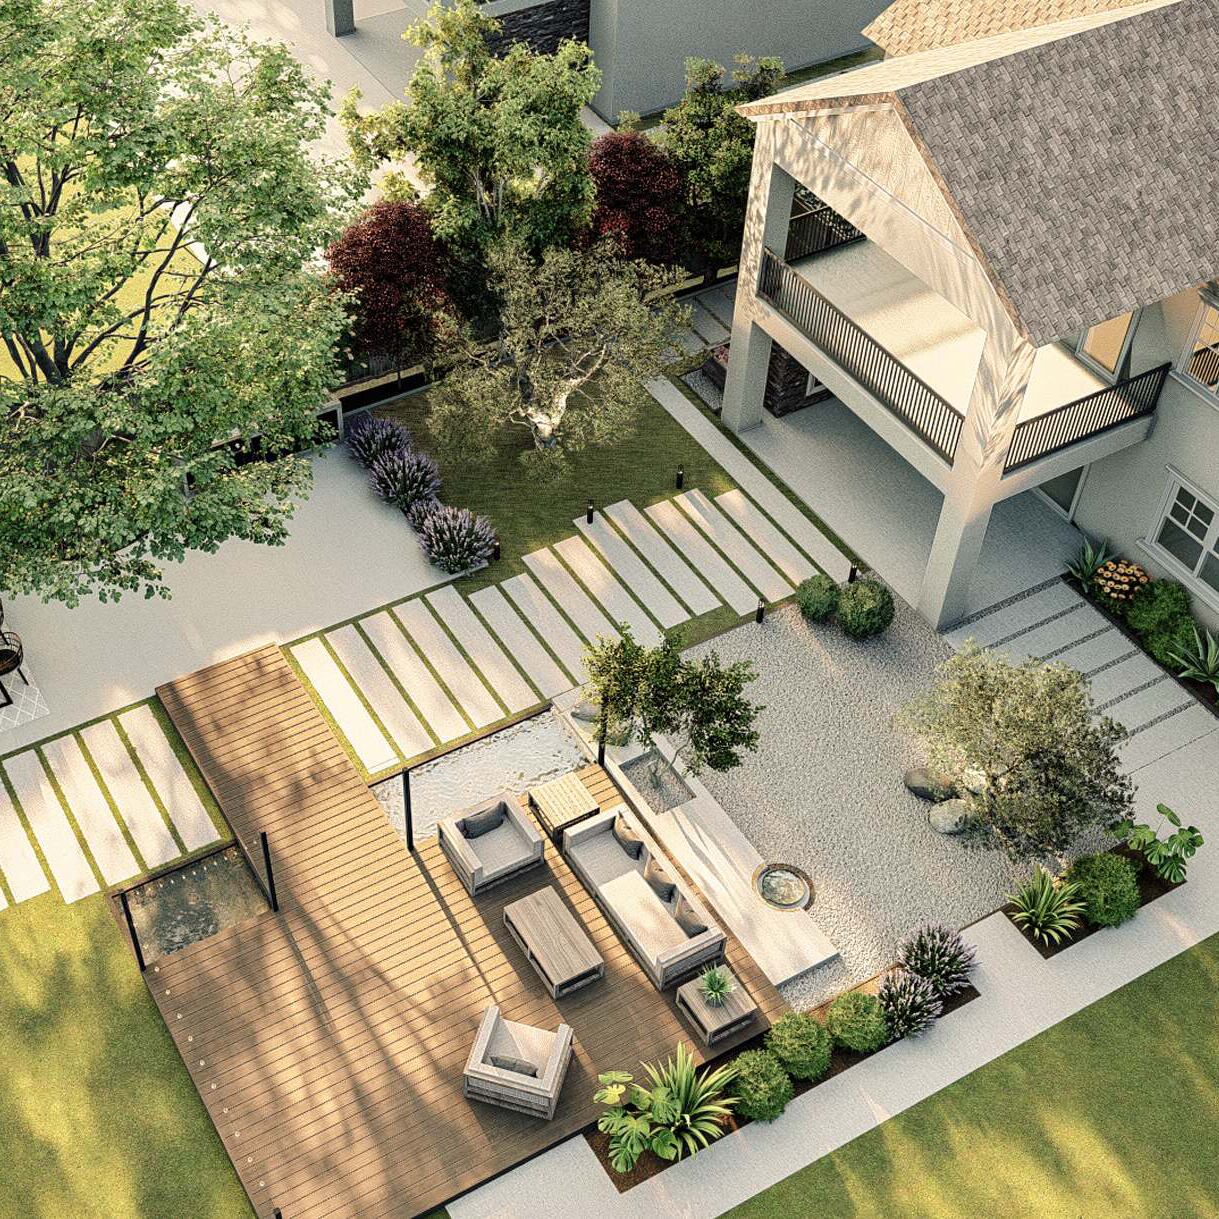 Elegant full-yard landscaping design by Homely Design Experts featuring a wooden deck, gravel path, lush greenery, and modern outdoor furniture.